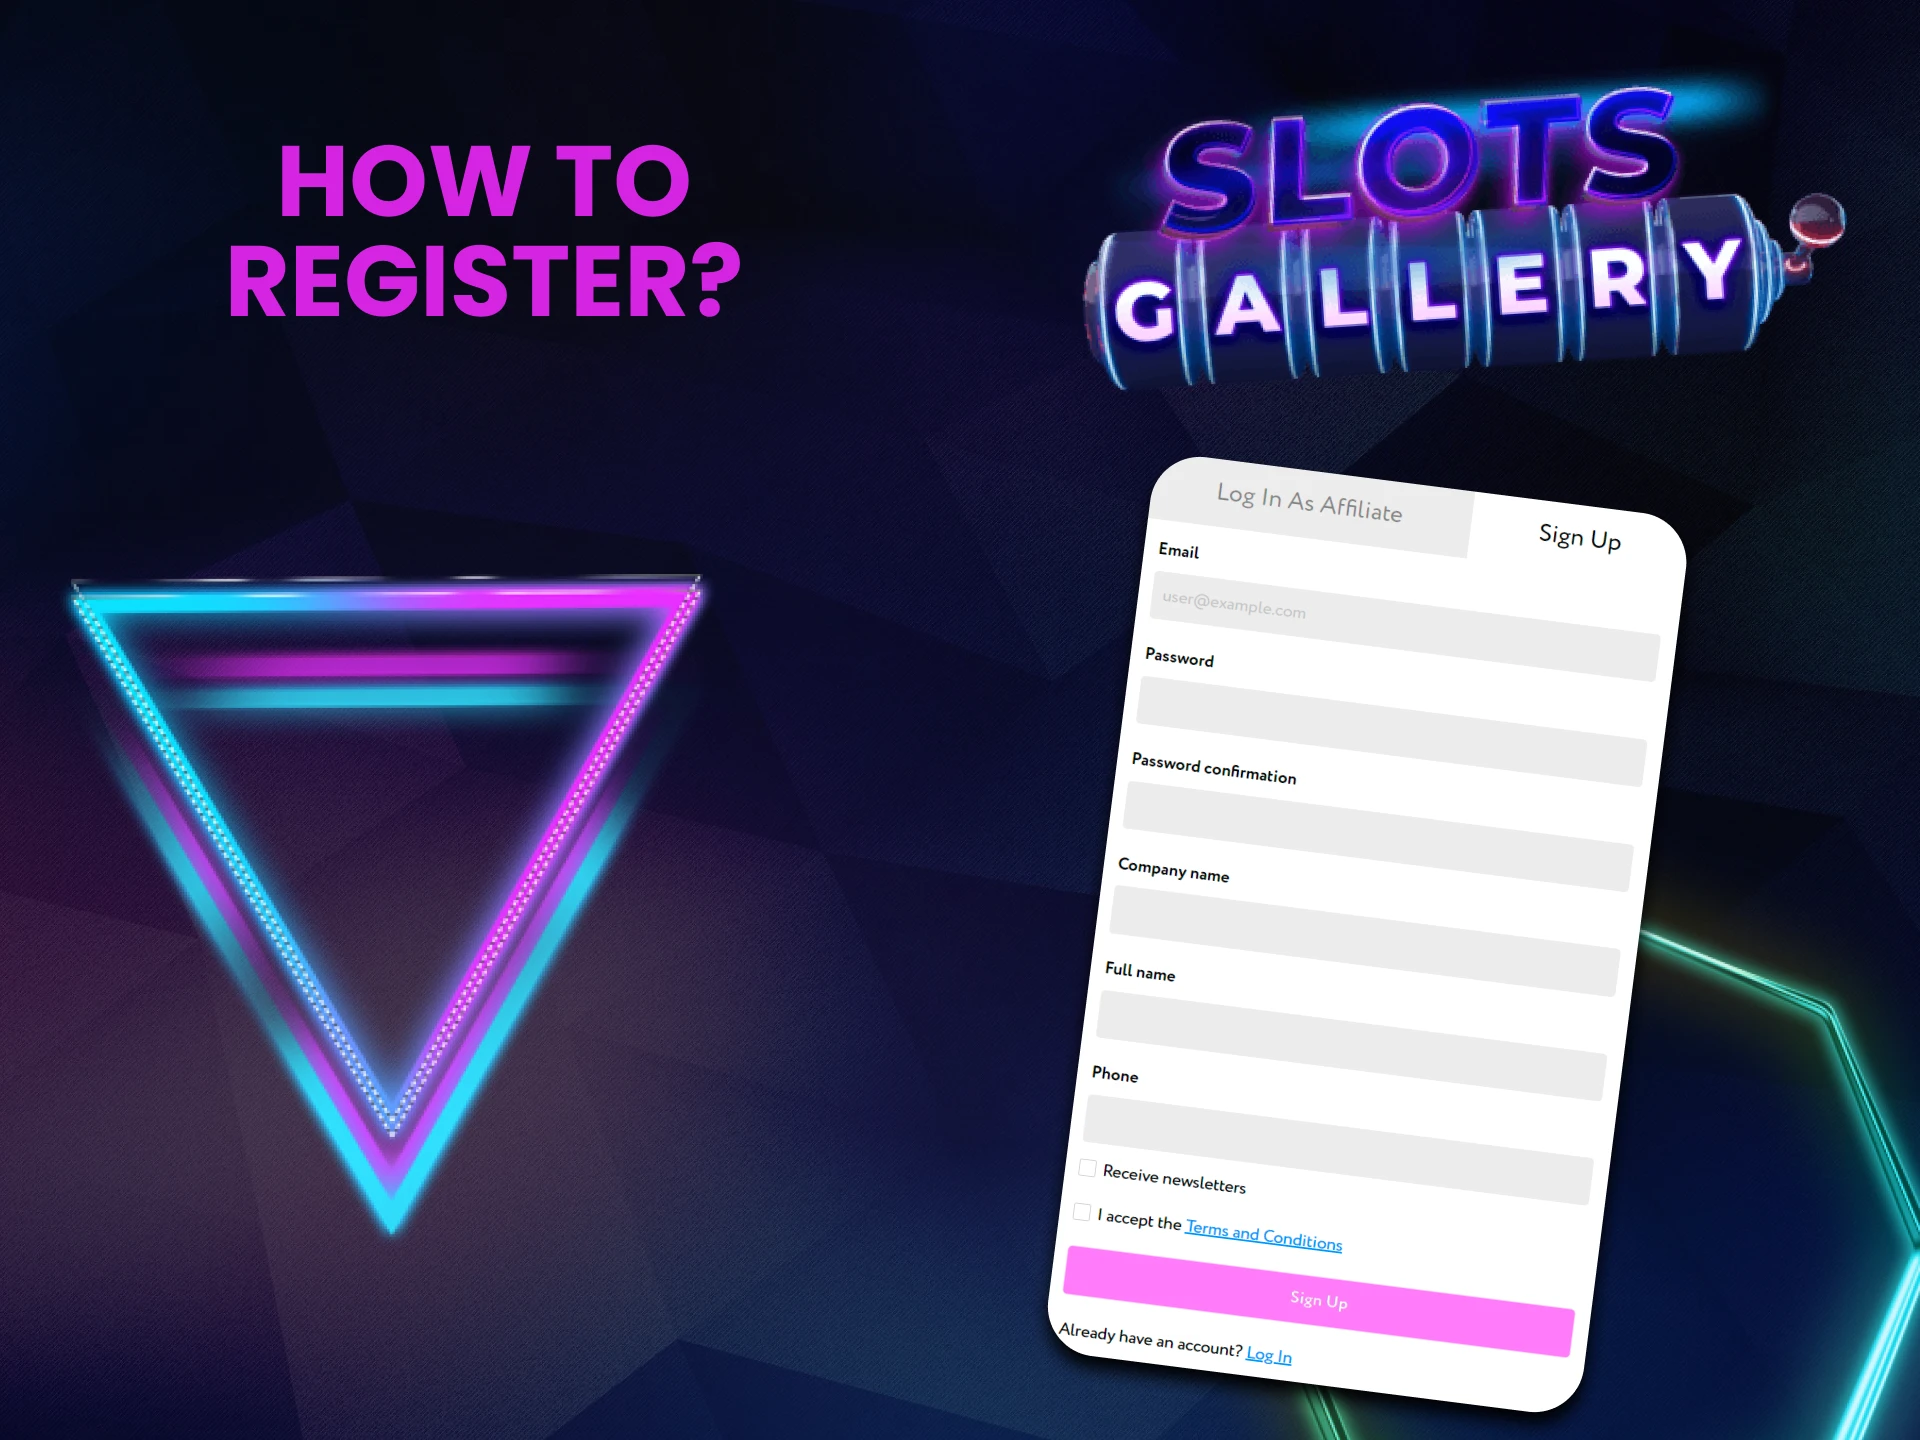 We will show you the registration process for the Slots Gallery affiliate program.